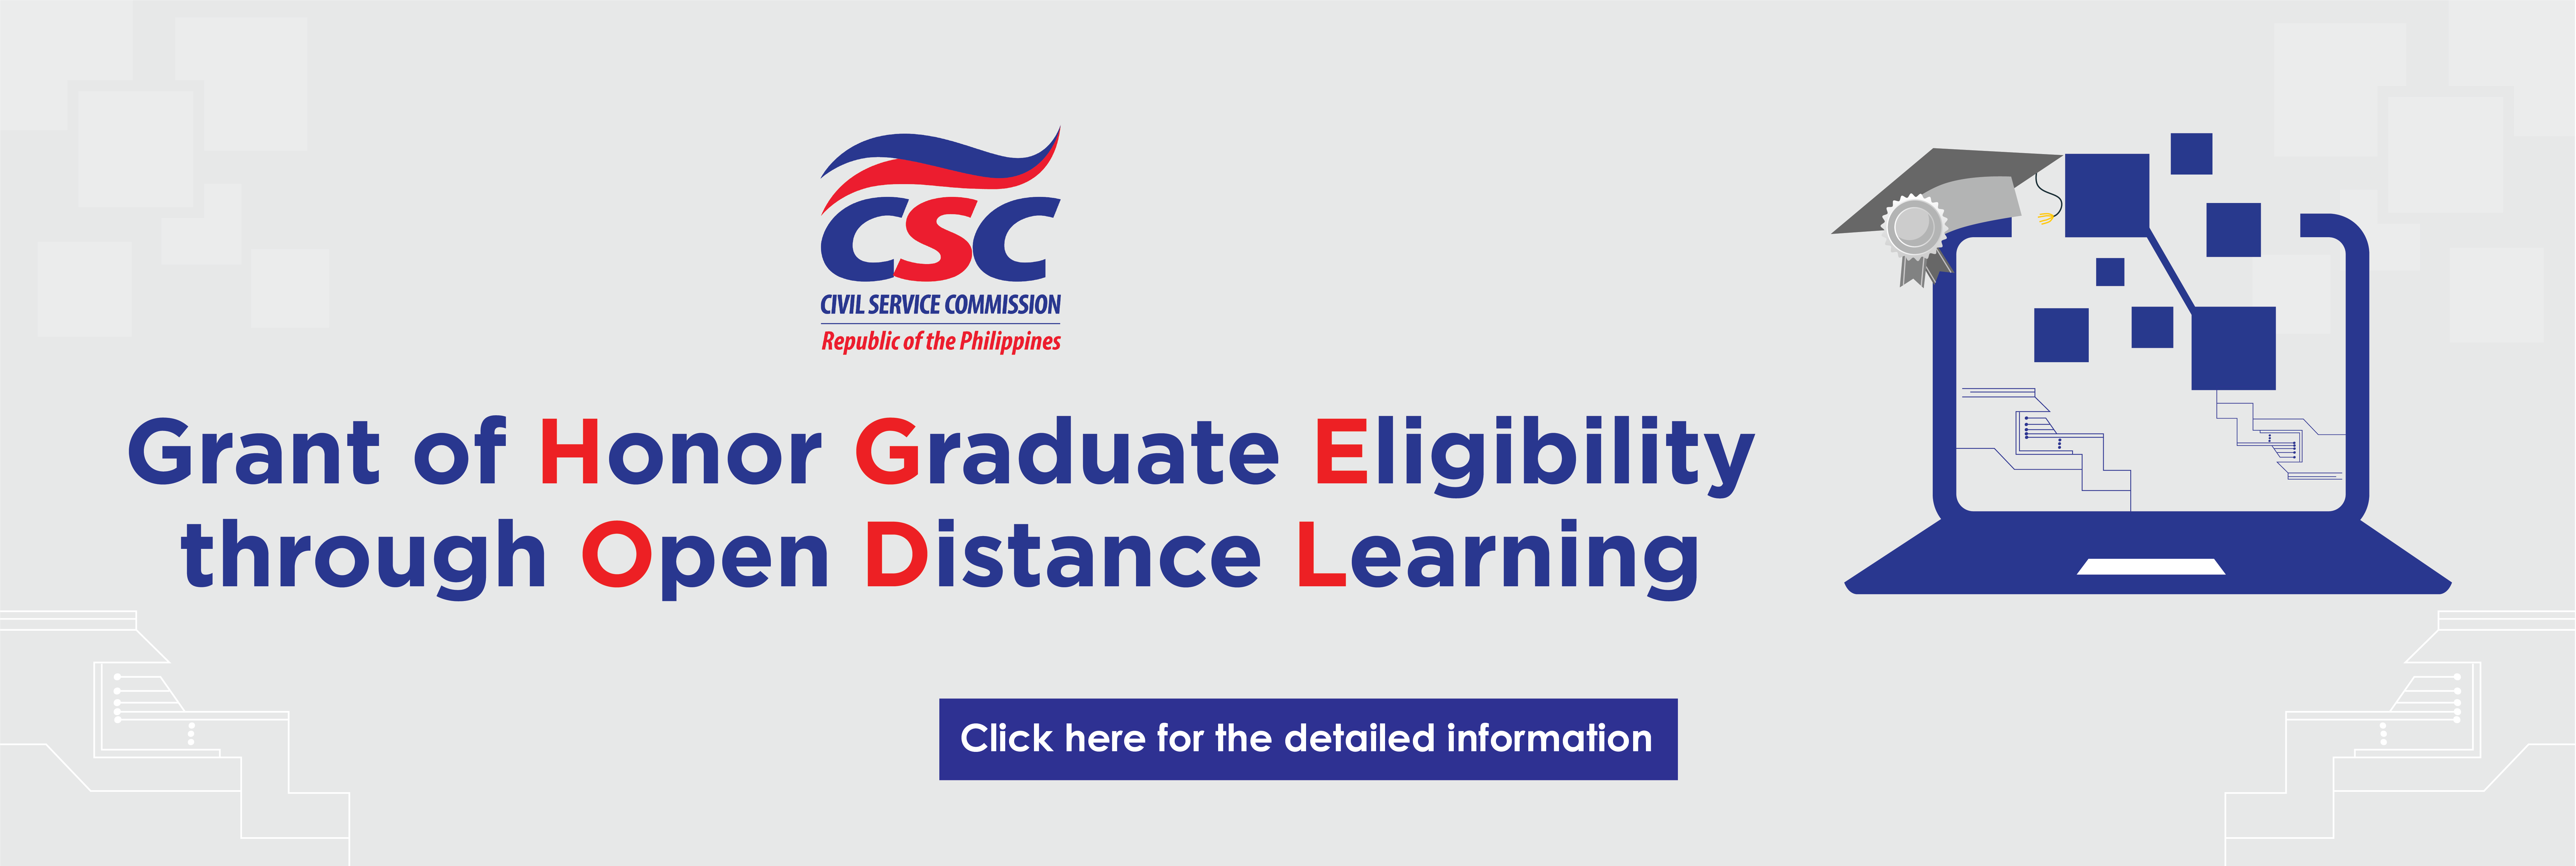 Honor Graduate Eligibility through Open Distance Learning 